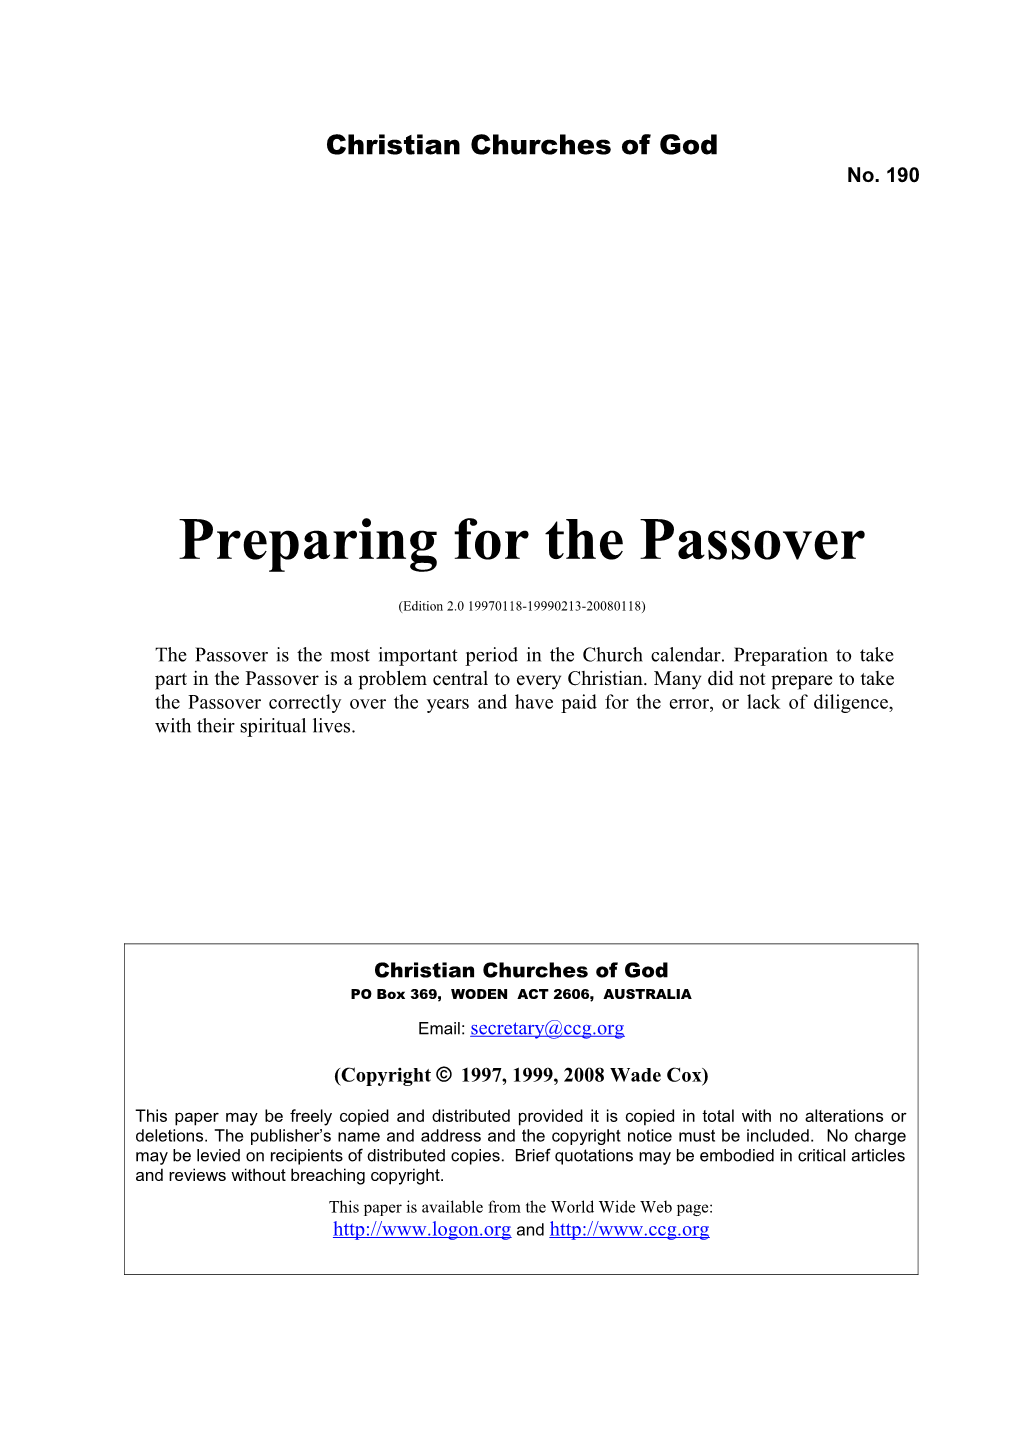 Preparing for the Passover (No. 190)